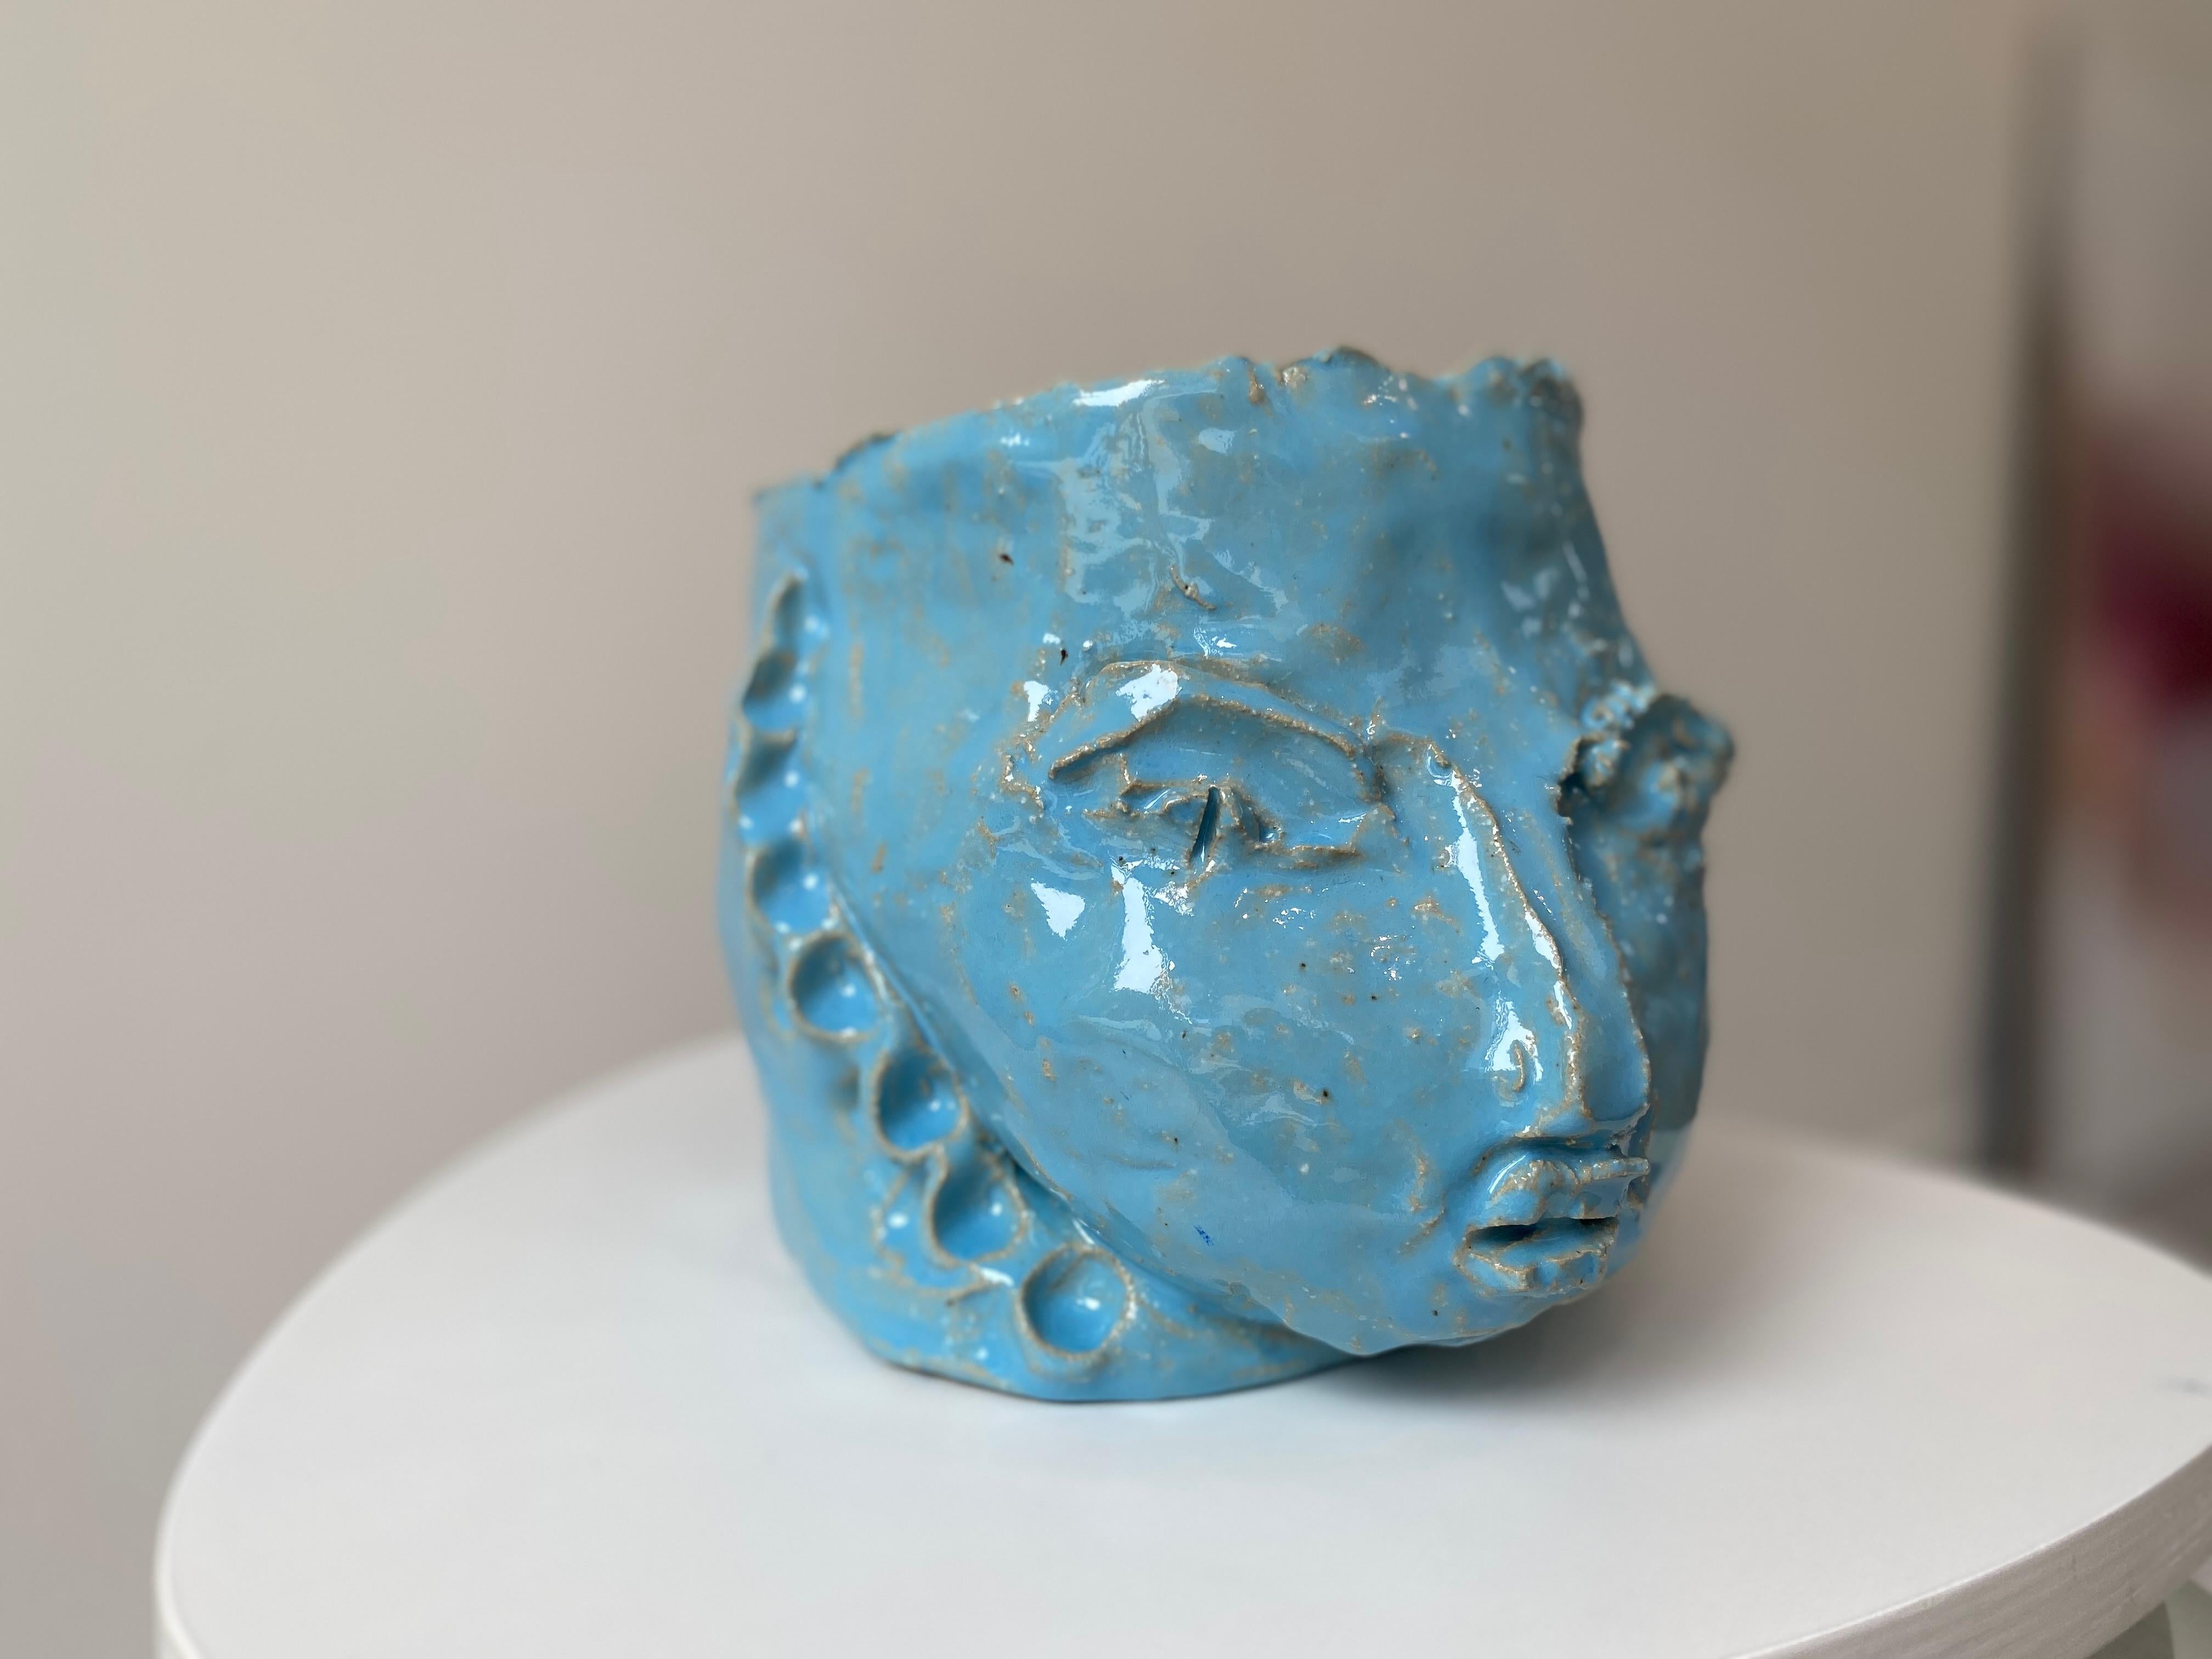 'Baby Blue' wabi sabi beauty in imperfection, appreciate simplicity, handmade unique sculpture.

Elevate your space with this extraordinary exquisitely sculpted clay face and head vase creation that promises to captivate and inspire. Transform your